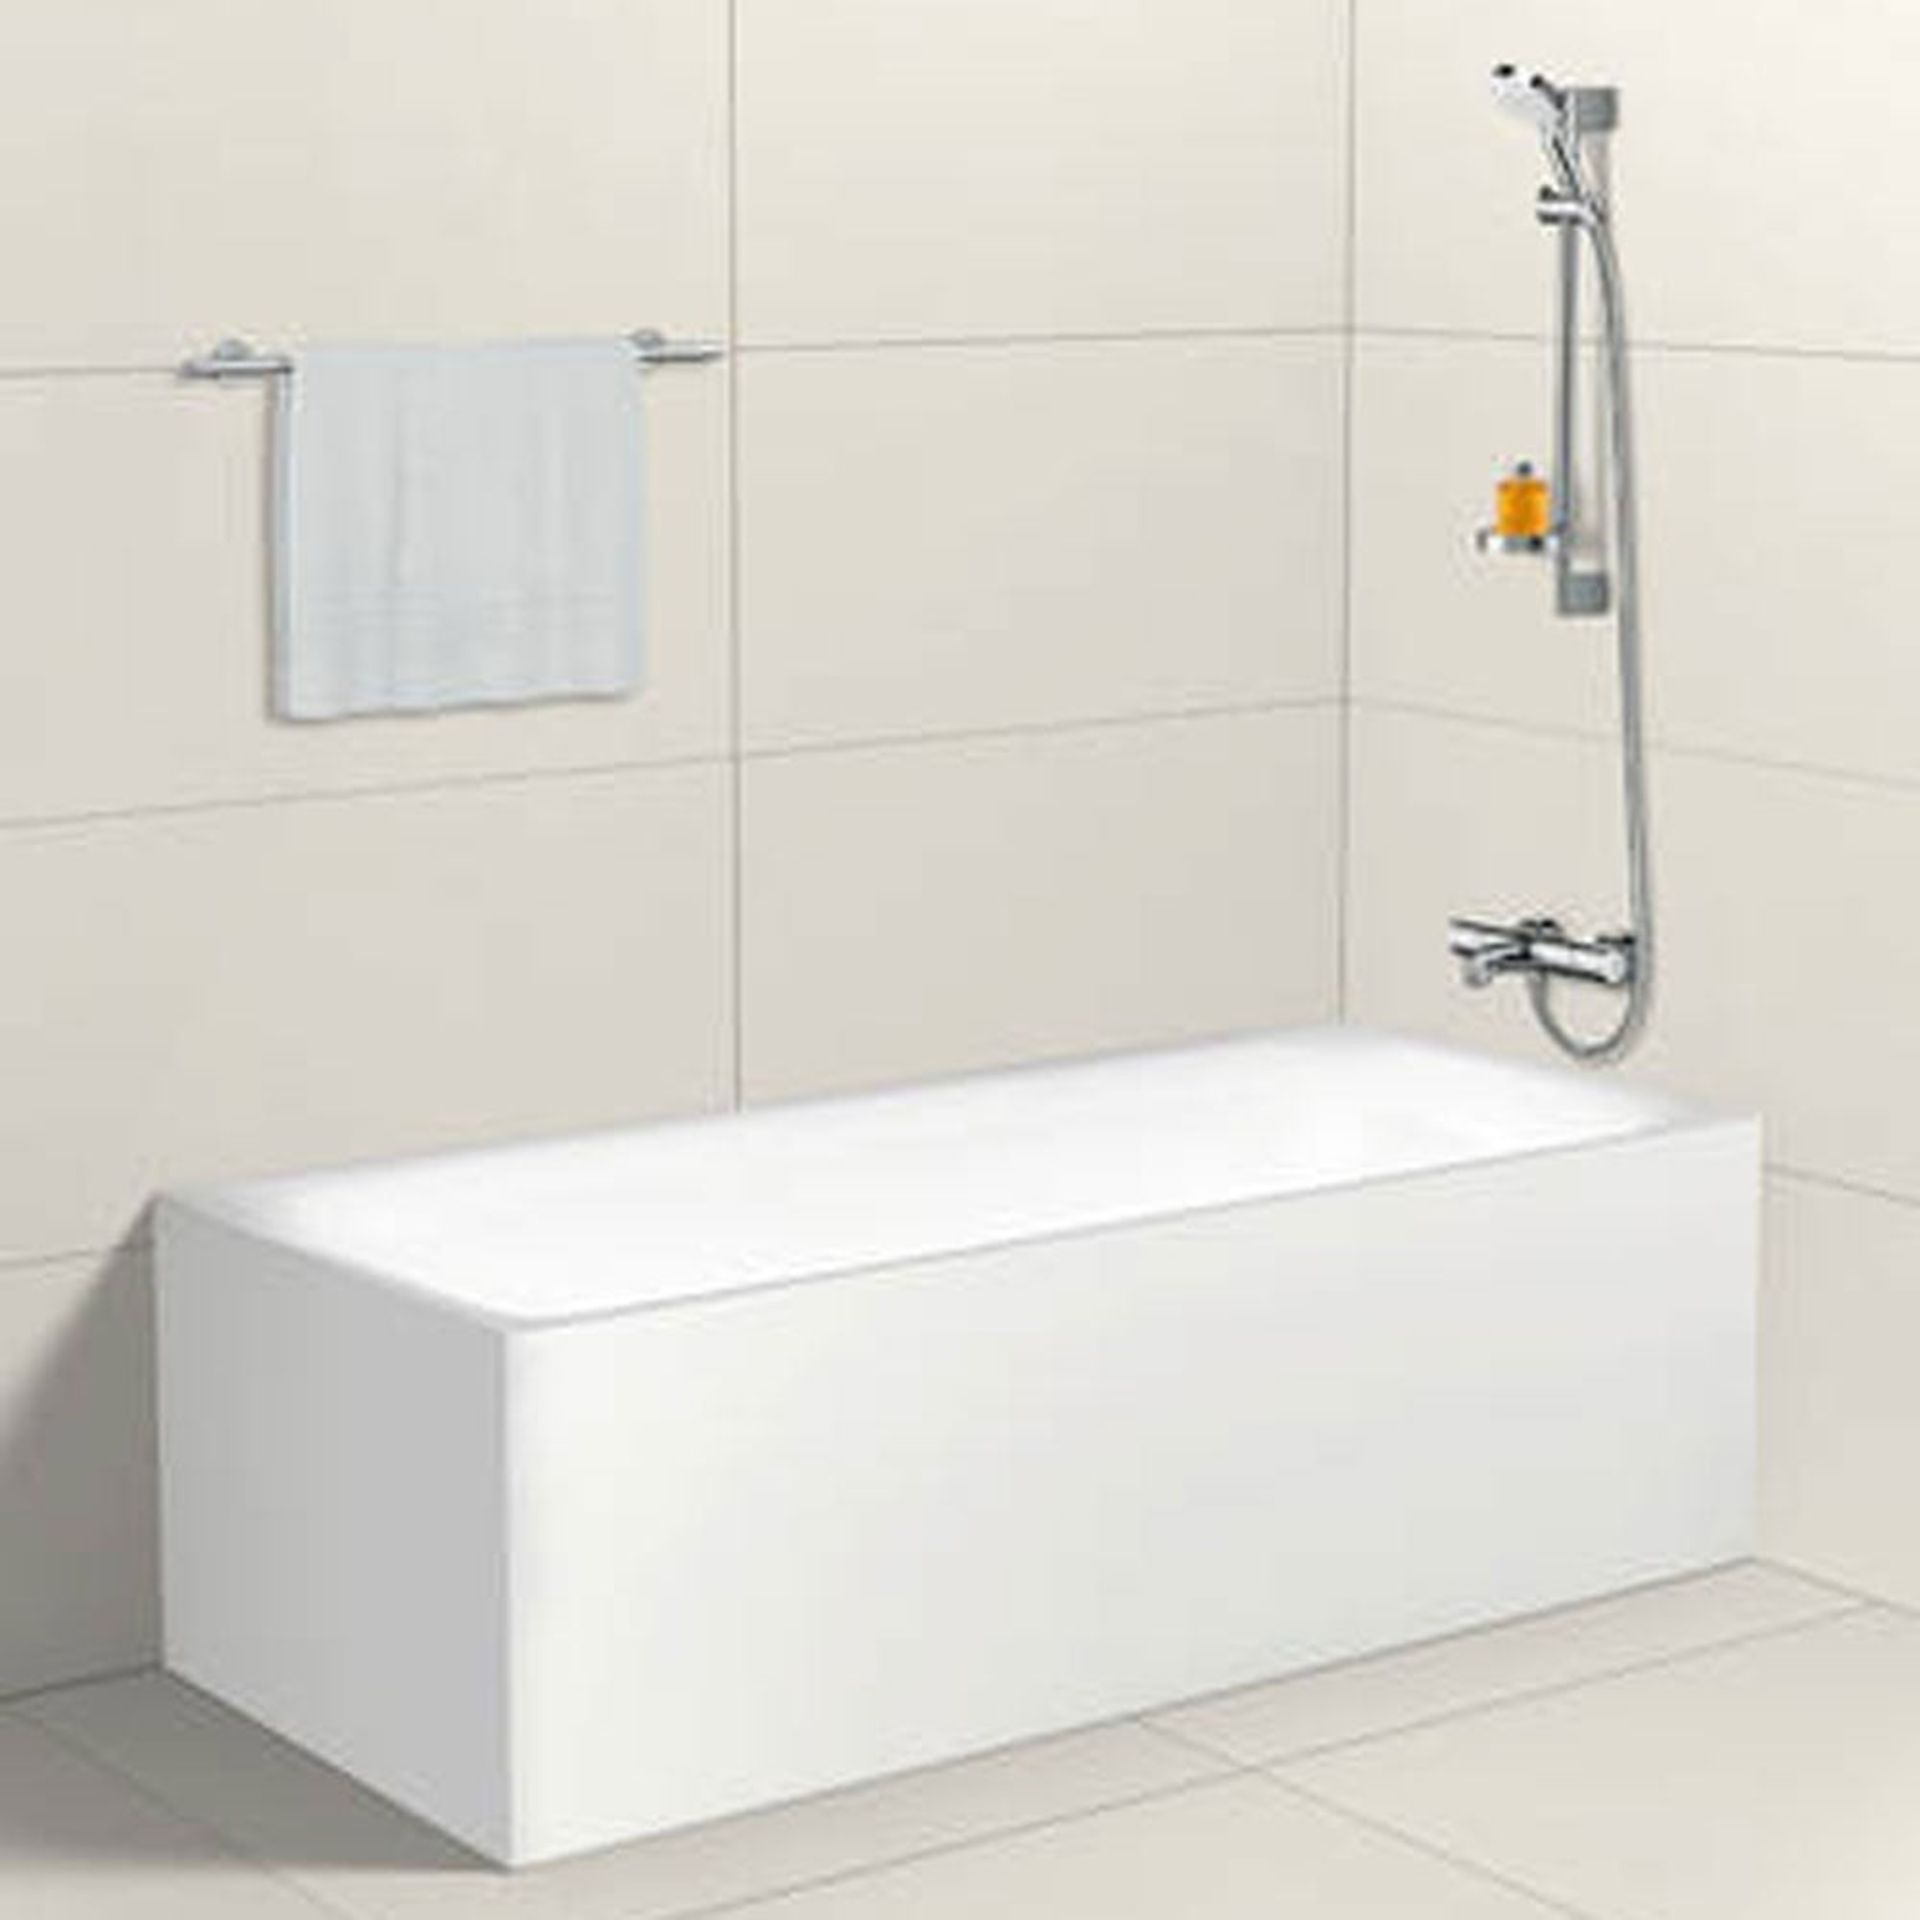 RRP - £159.99 hansgrohe Ecostat 1001 CL thermostatic bath and shower mixer, chrome - Image 2 of 2